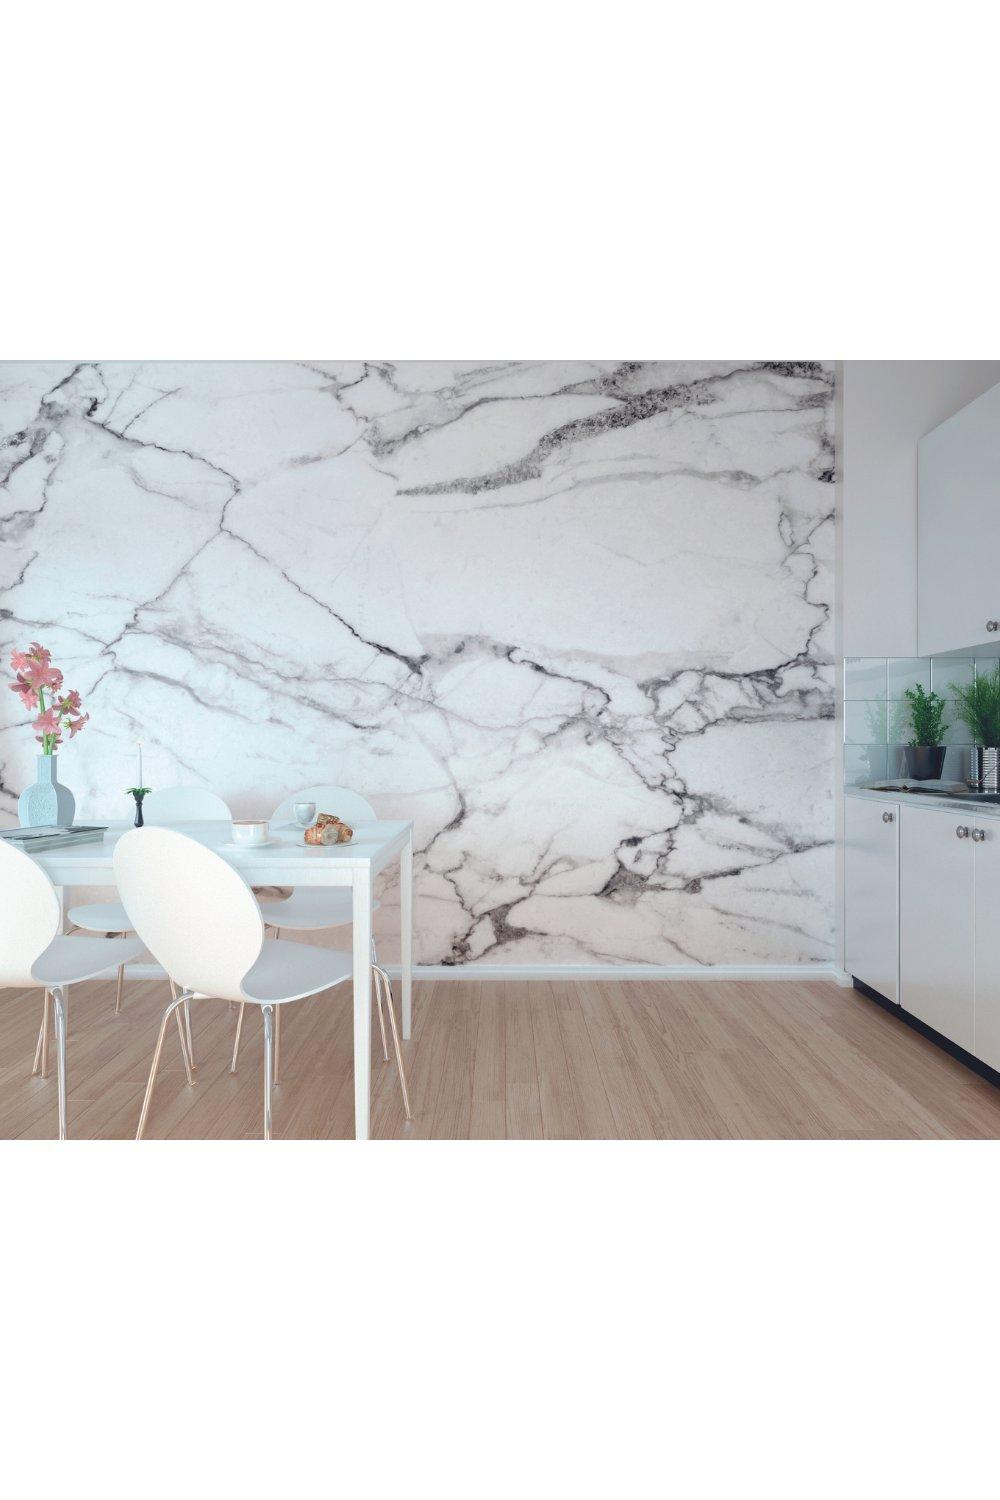 Marbled Ink Wall Matt Smooth Paste the Wall Mural 300cm wide x 240cm high